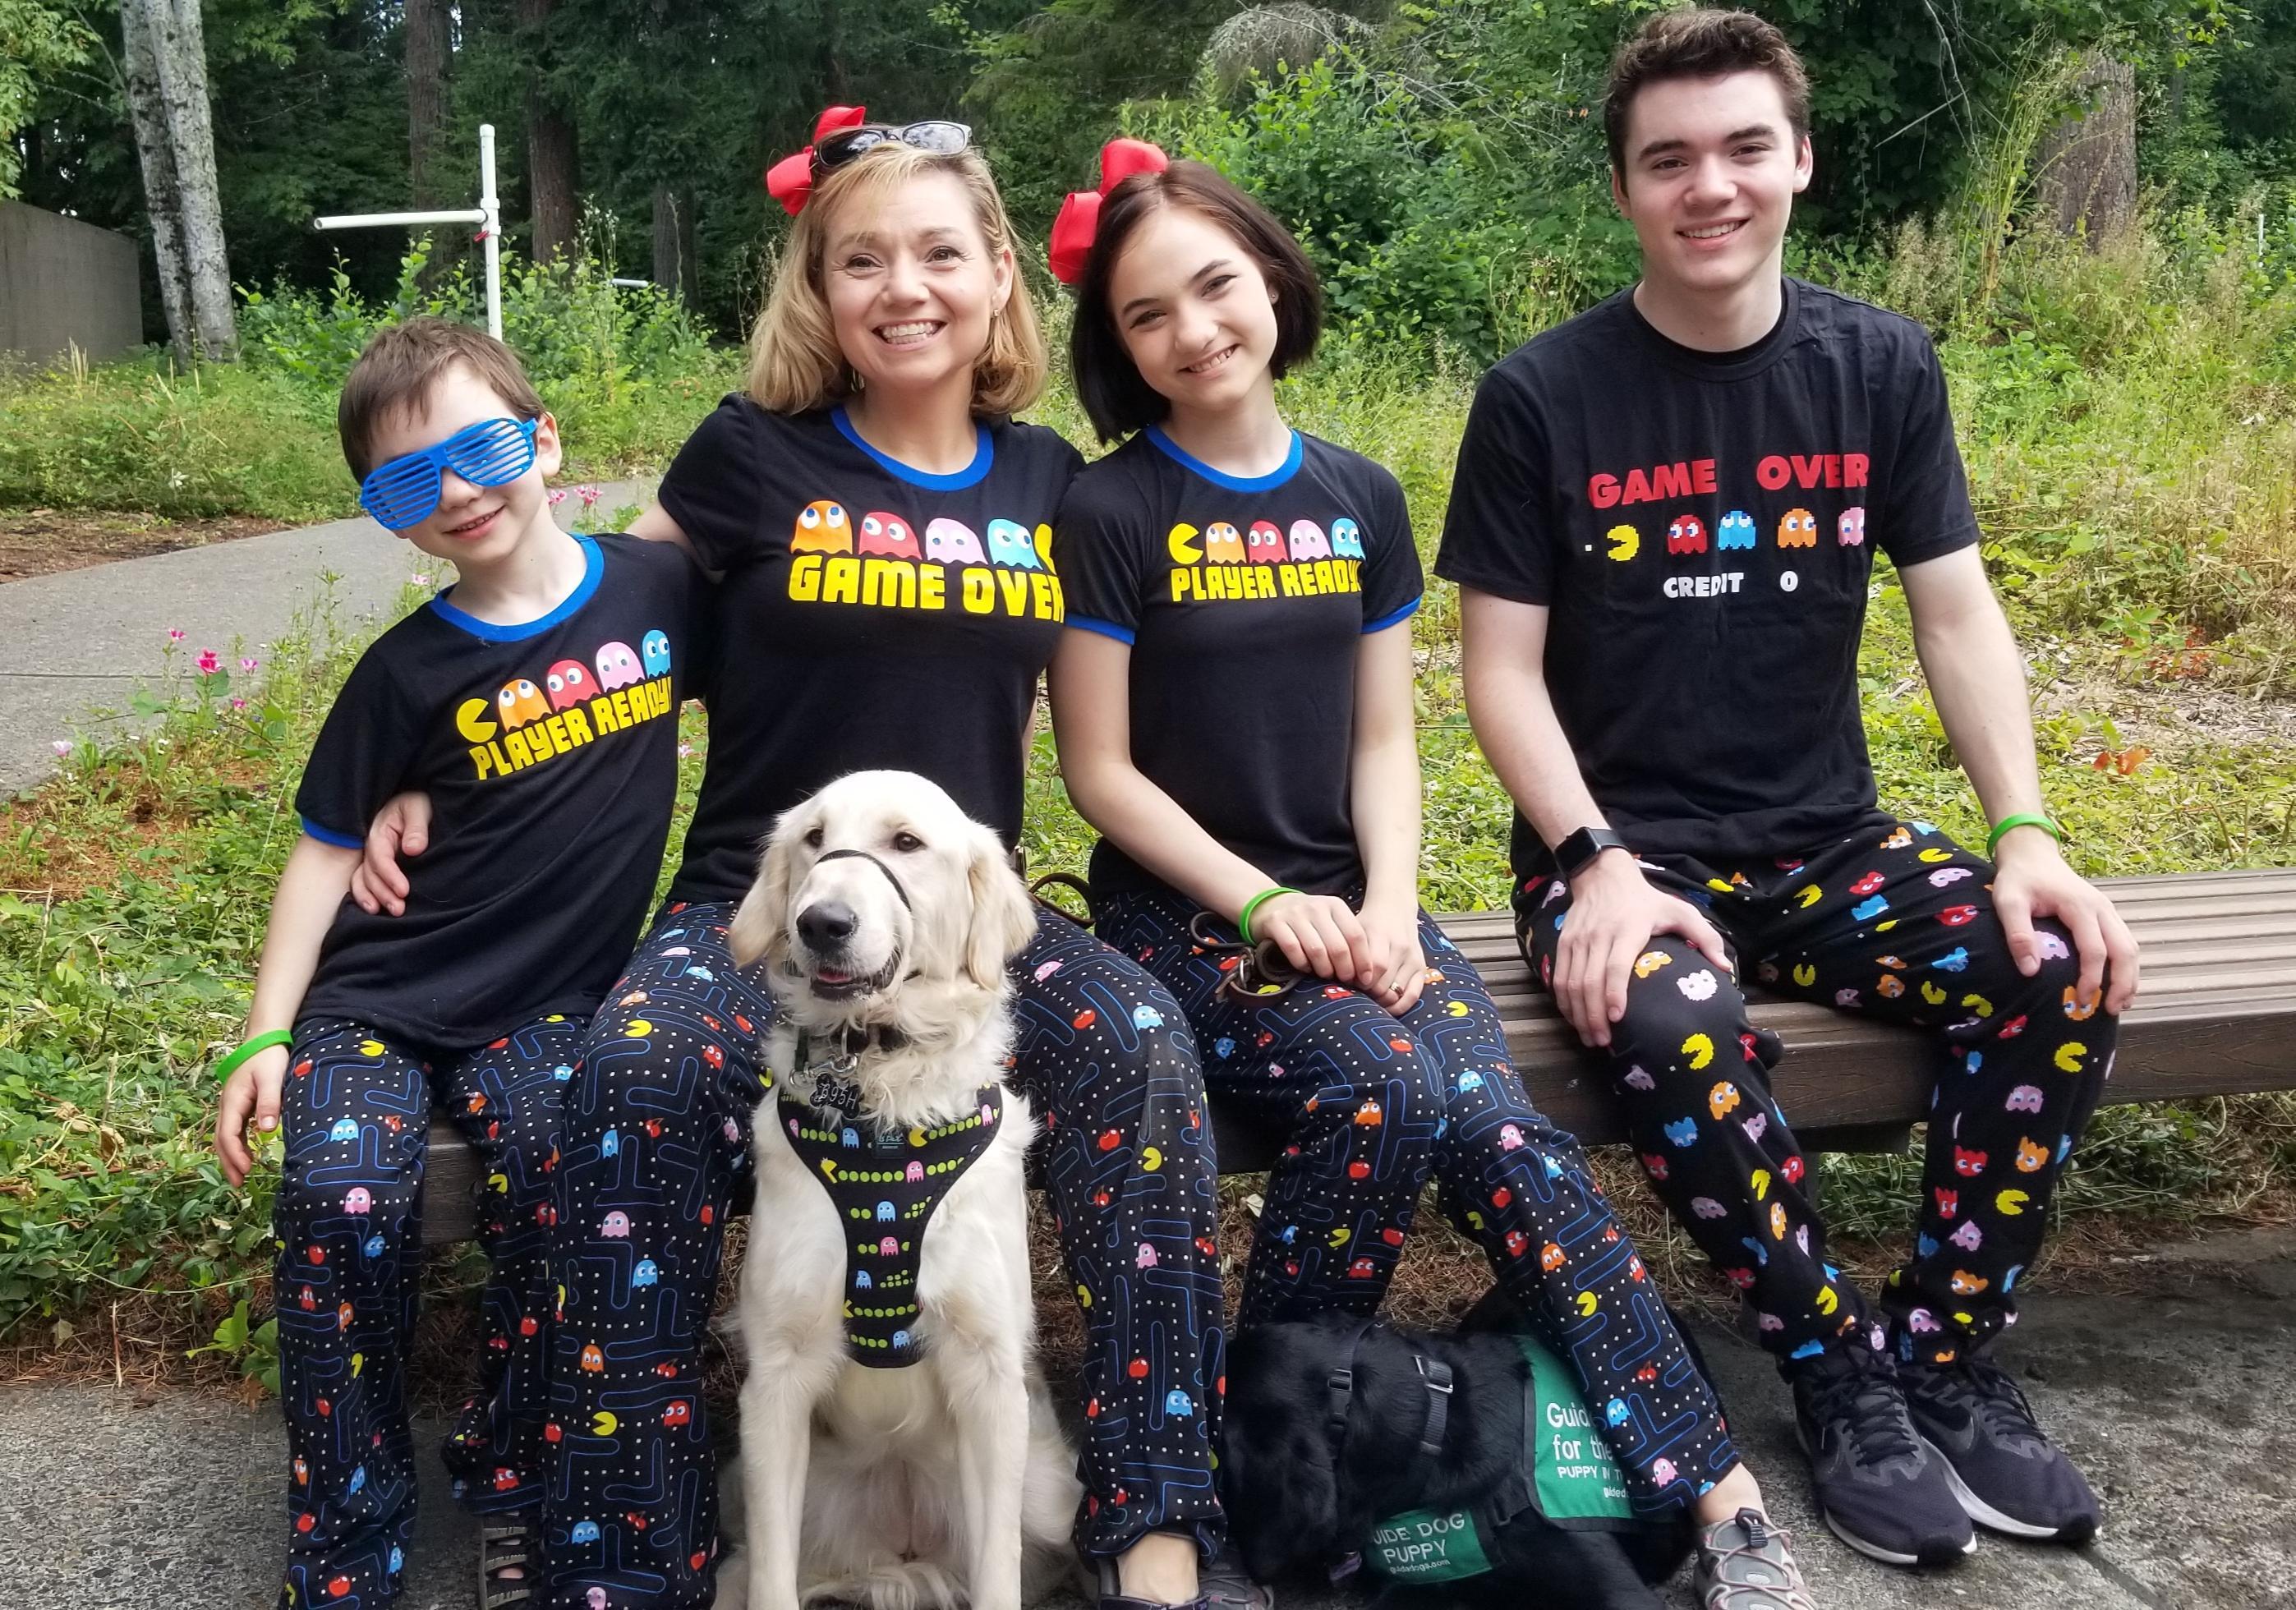 The Crispin Family of four donned in matching 80s themed outfits poses with GDB puppy, Chamberlin, a black Lab.